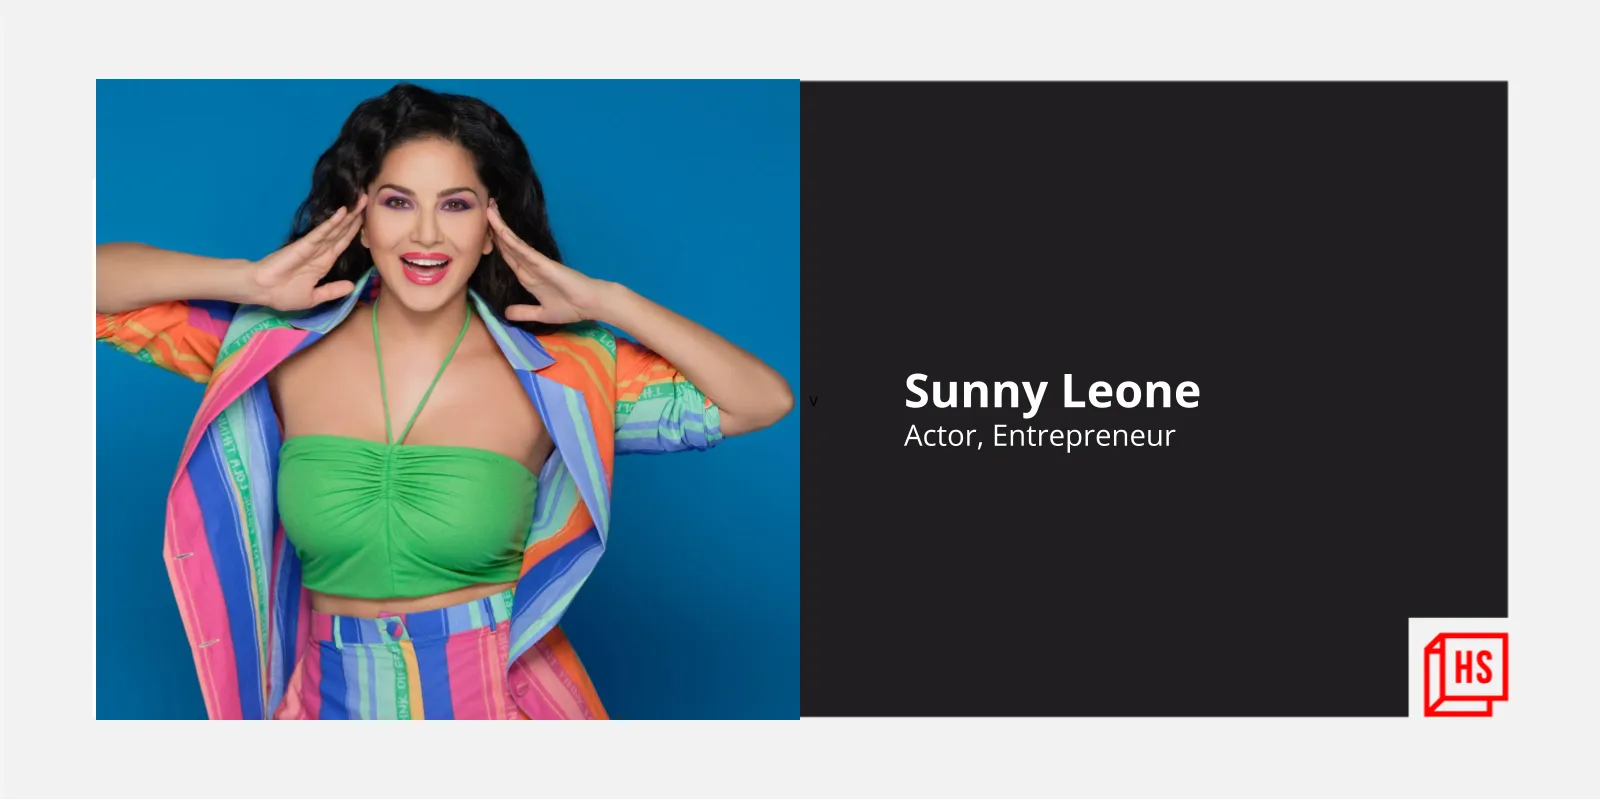 Photo of [HS Exclusive] Acting is my passion, but being an entrepreneur comes naturally: Sunny Leone